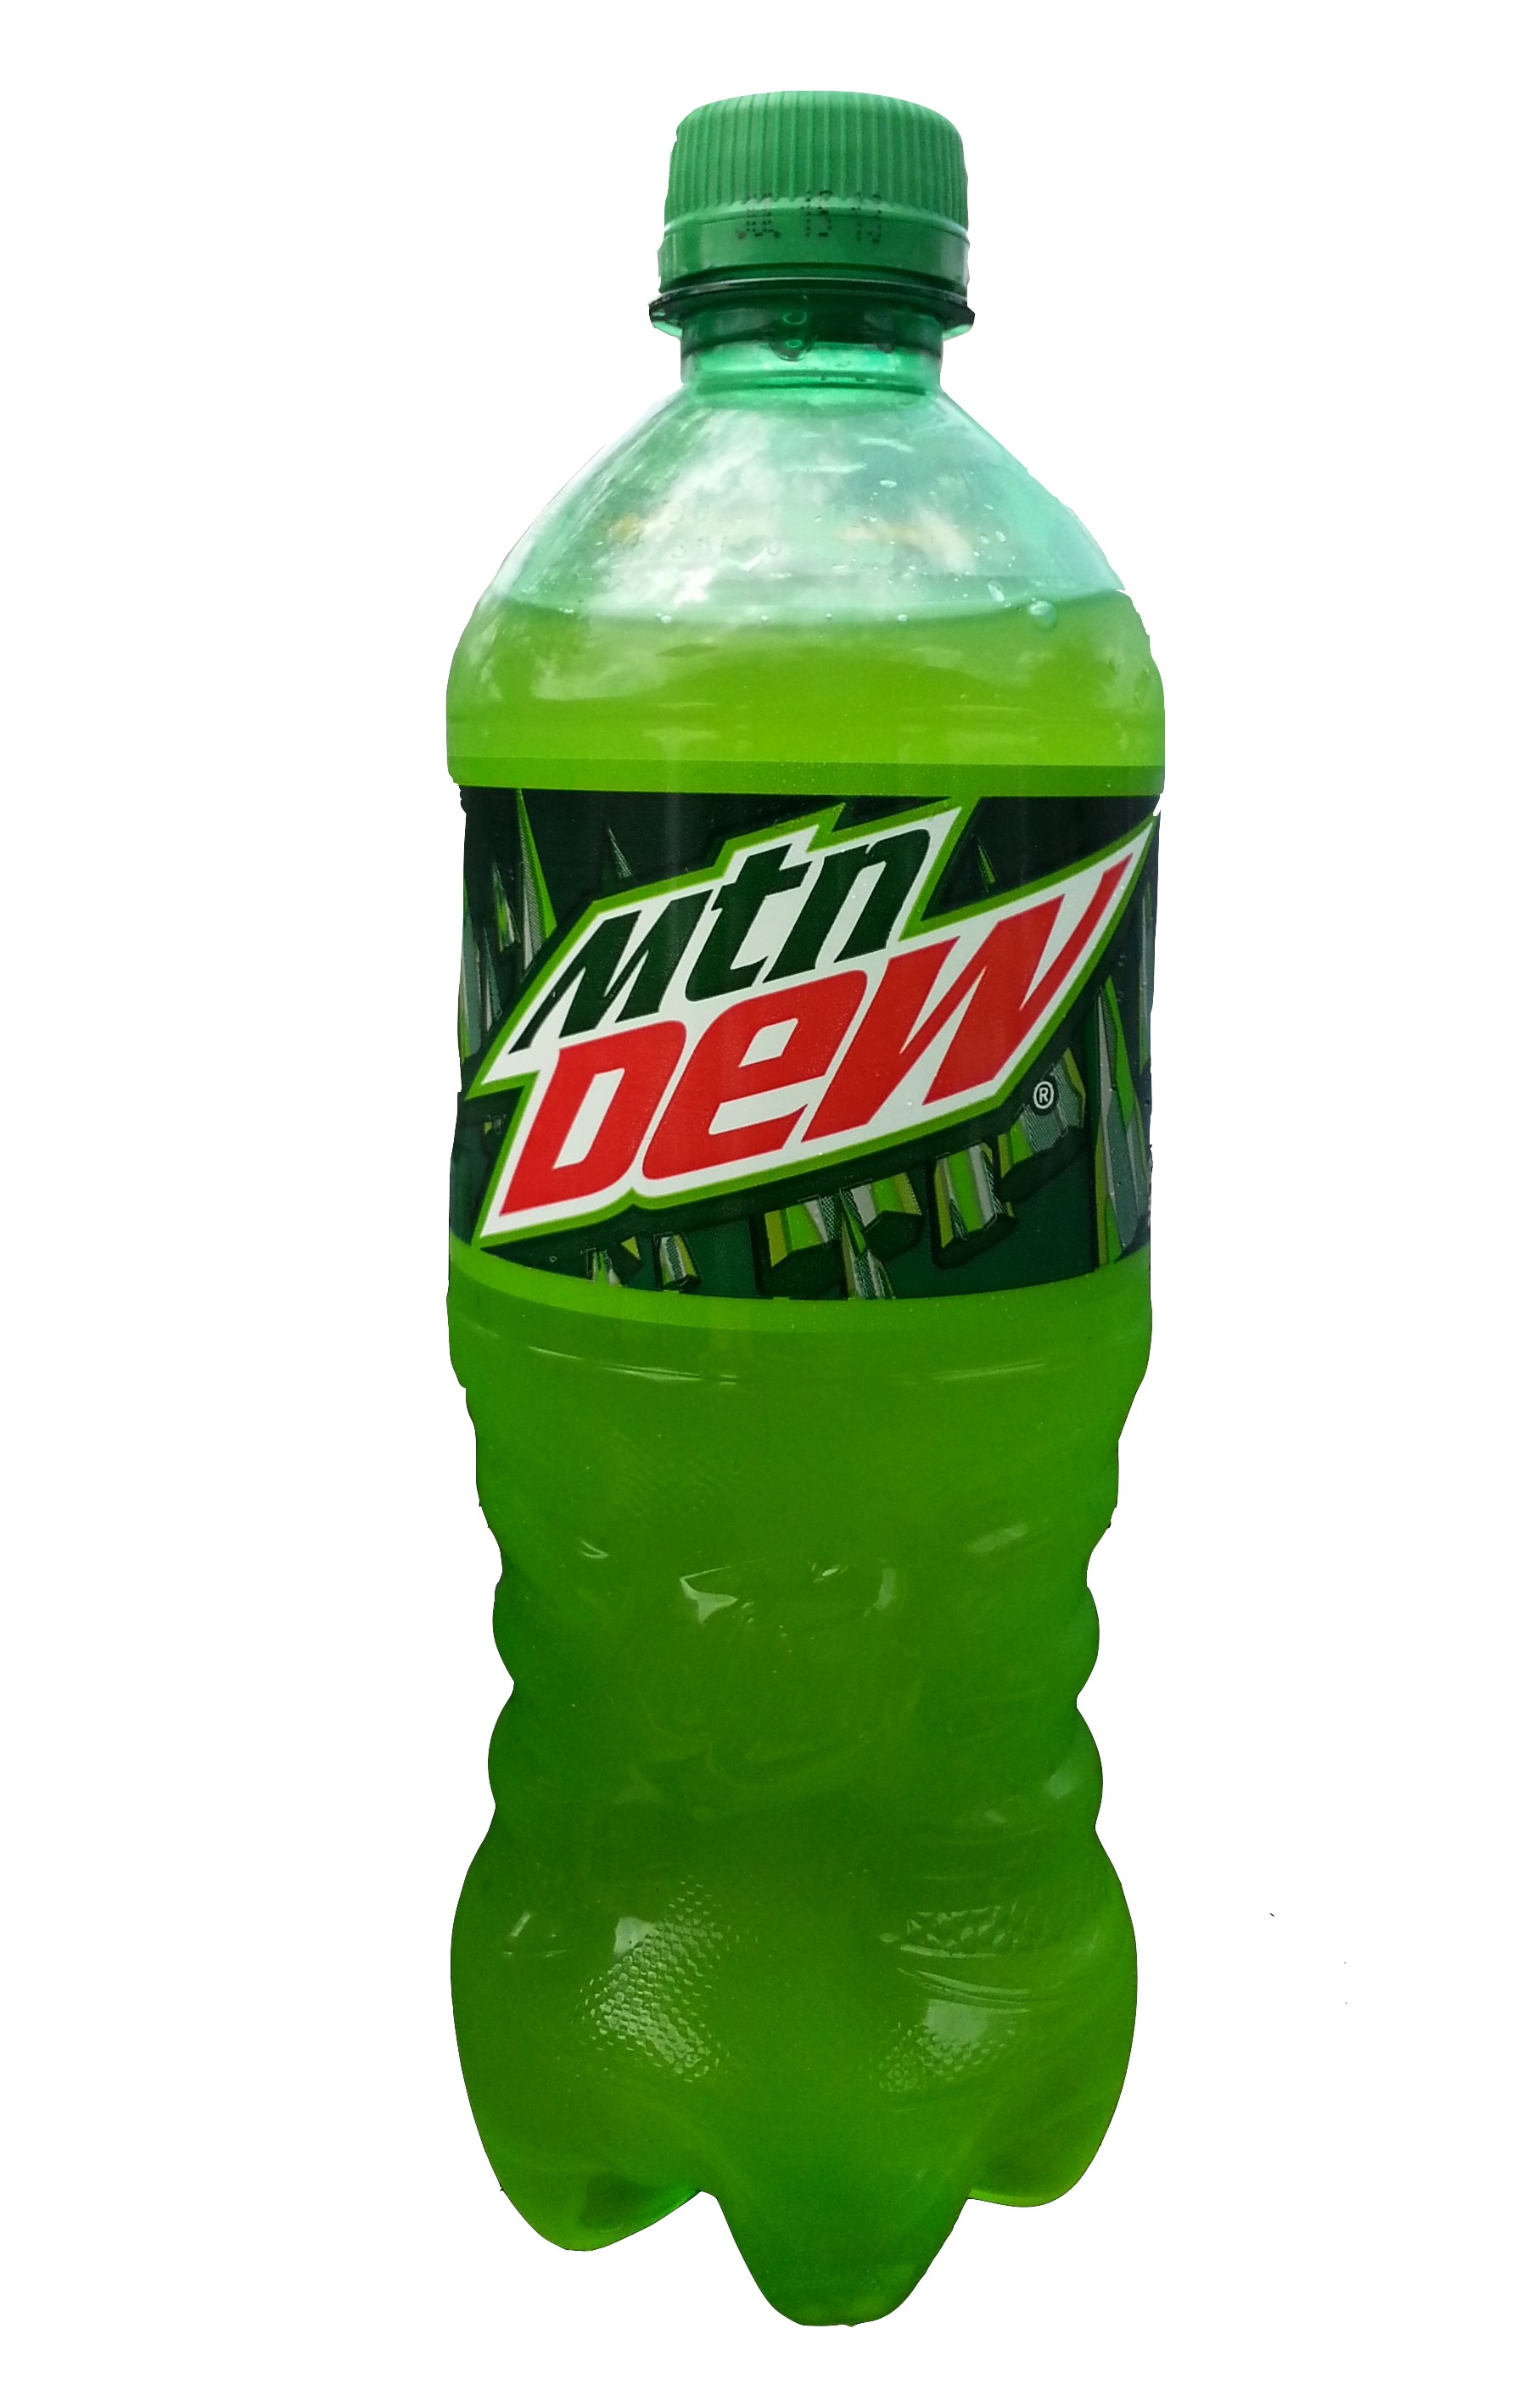 History mountain dew bottle HISTORY OF